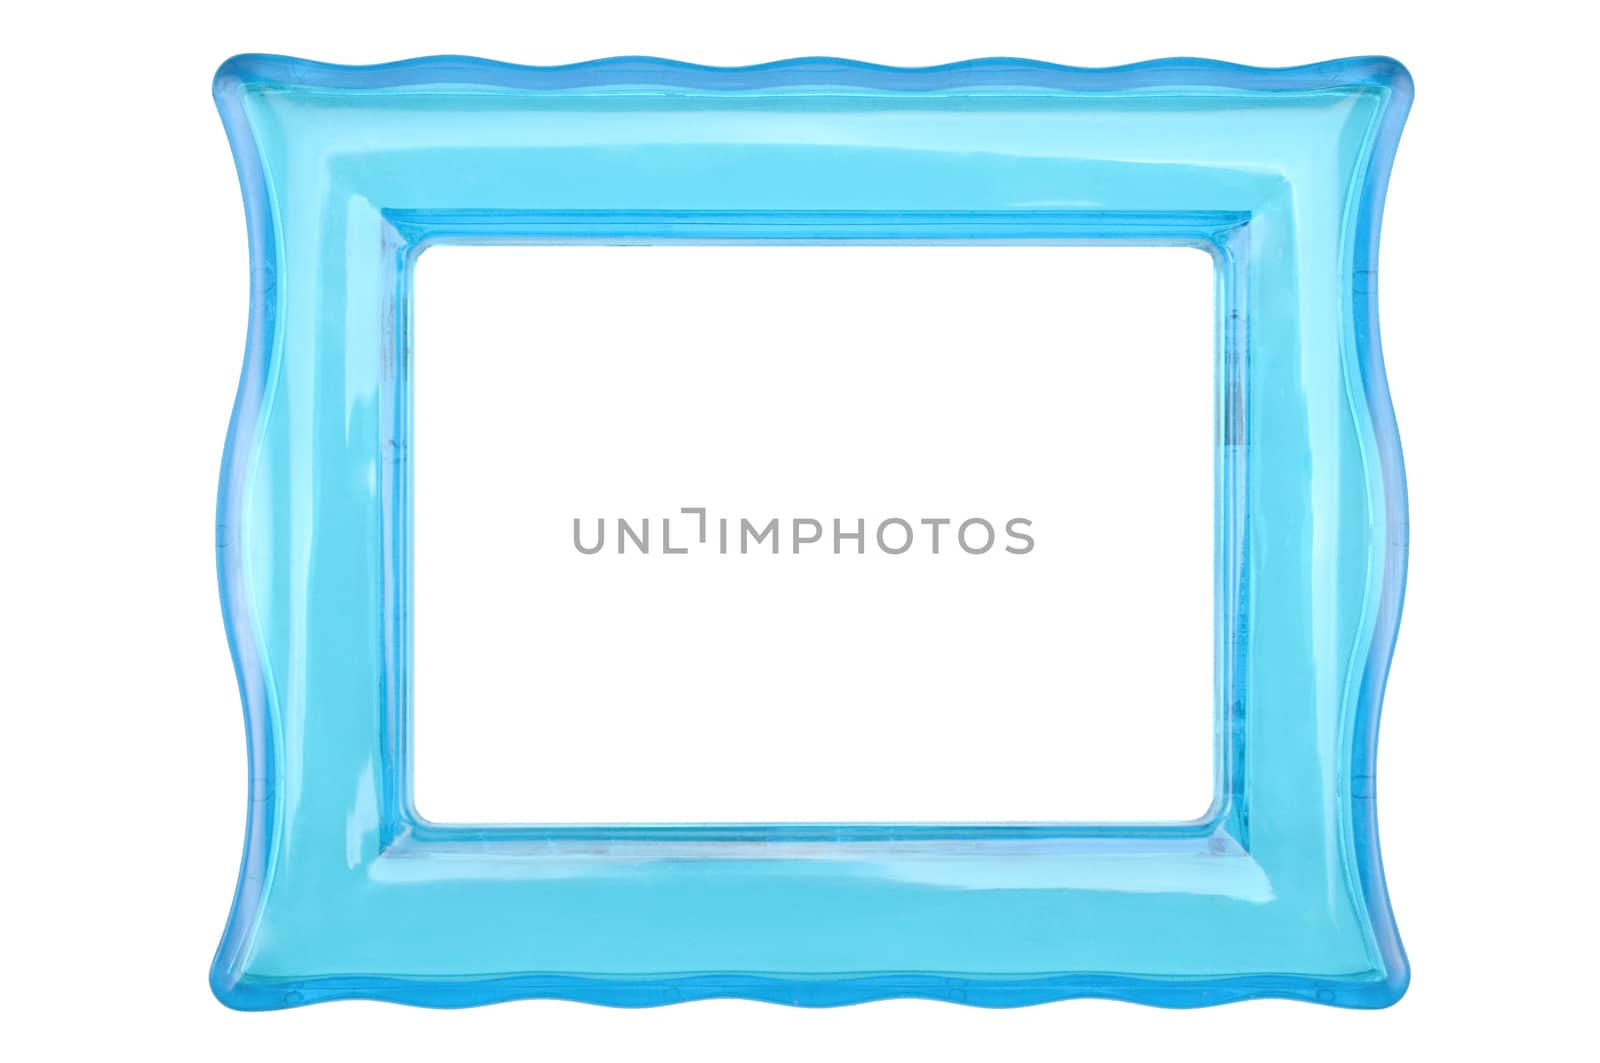 Vintage transparent plastic turquoise color photo frame on an isolated white background.